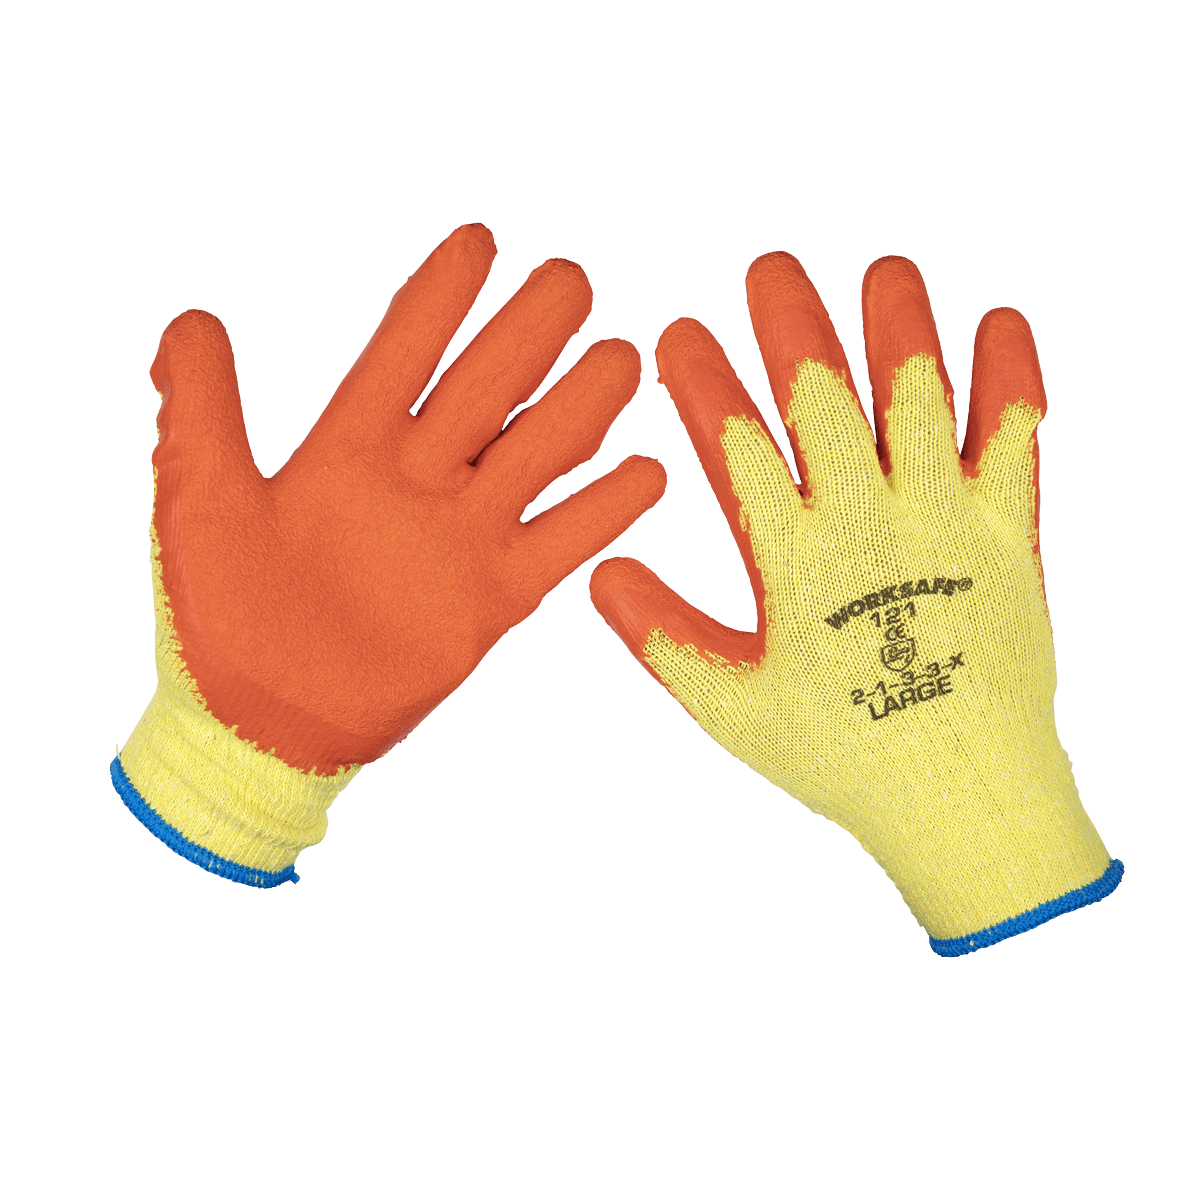 Sealey Super Grip Knitted Gloves Latex Palm